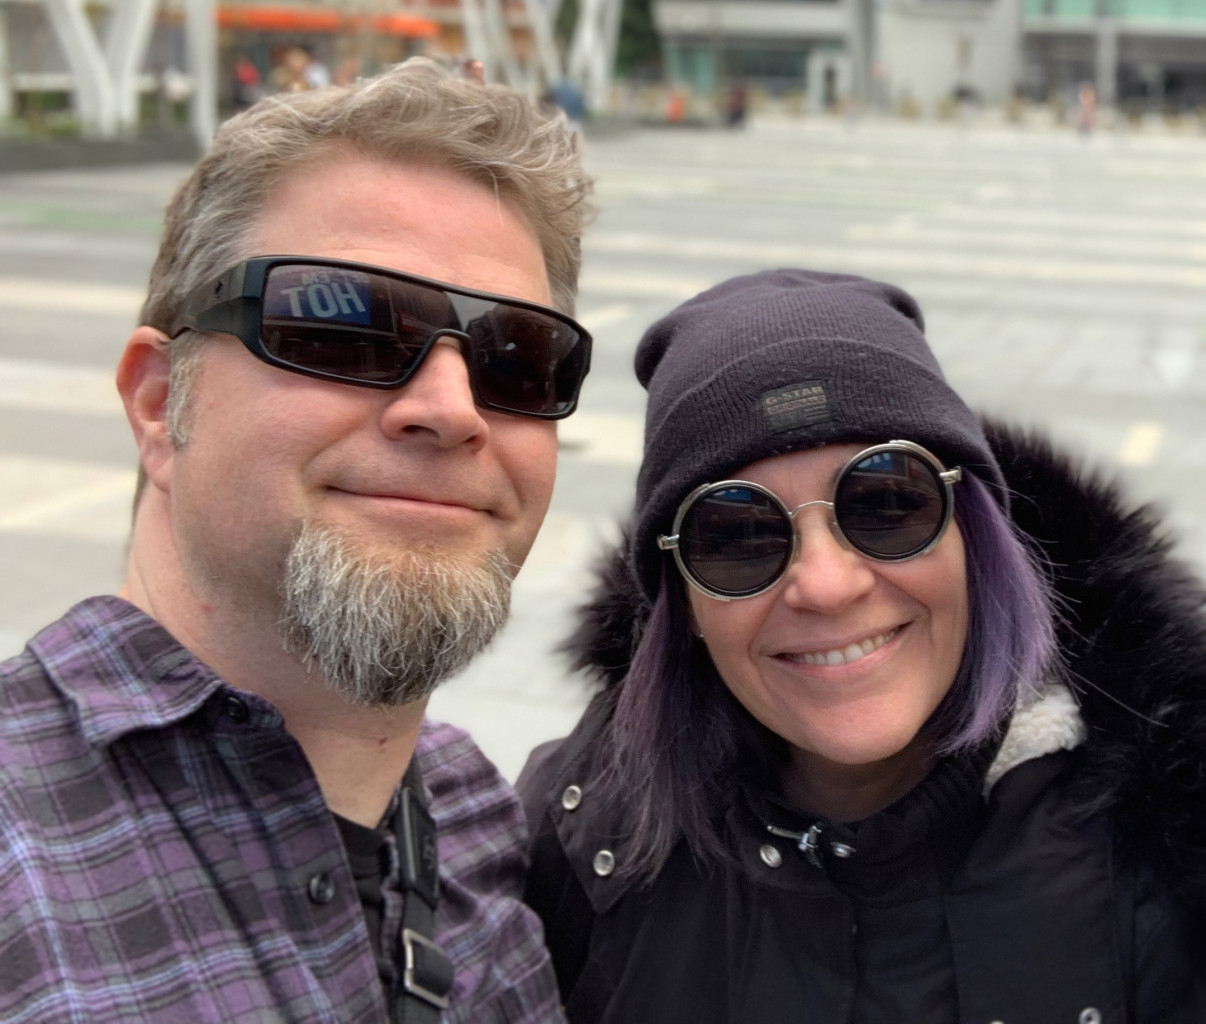 A picture of Chris and Wendy, wearing interesting sunglasses and smiling, exploring the urban jungle.